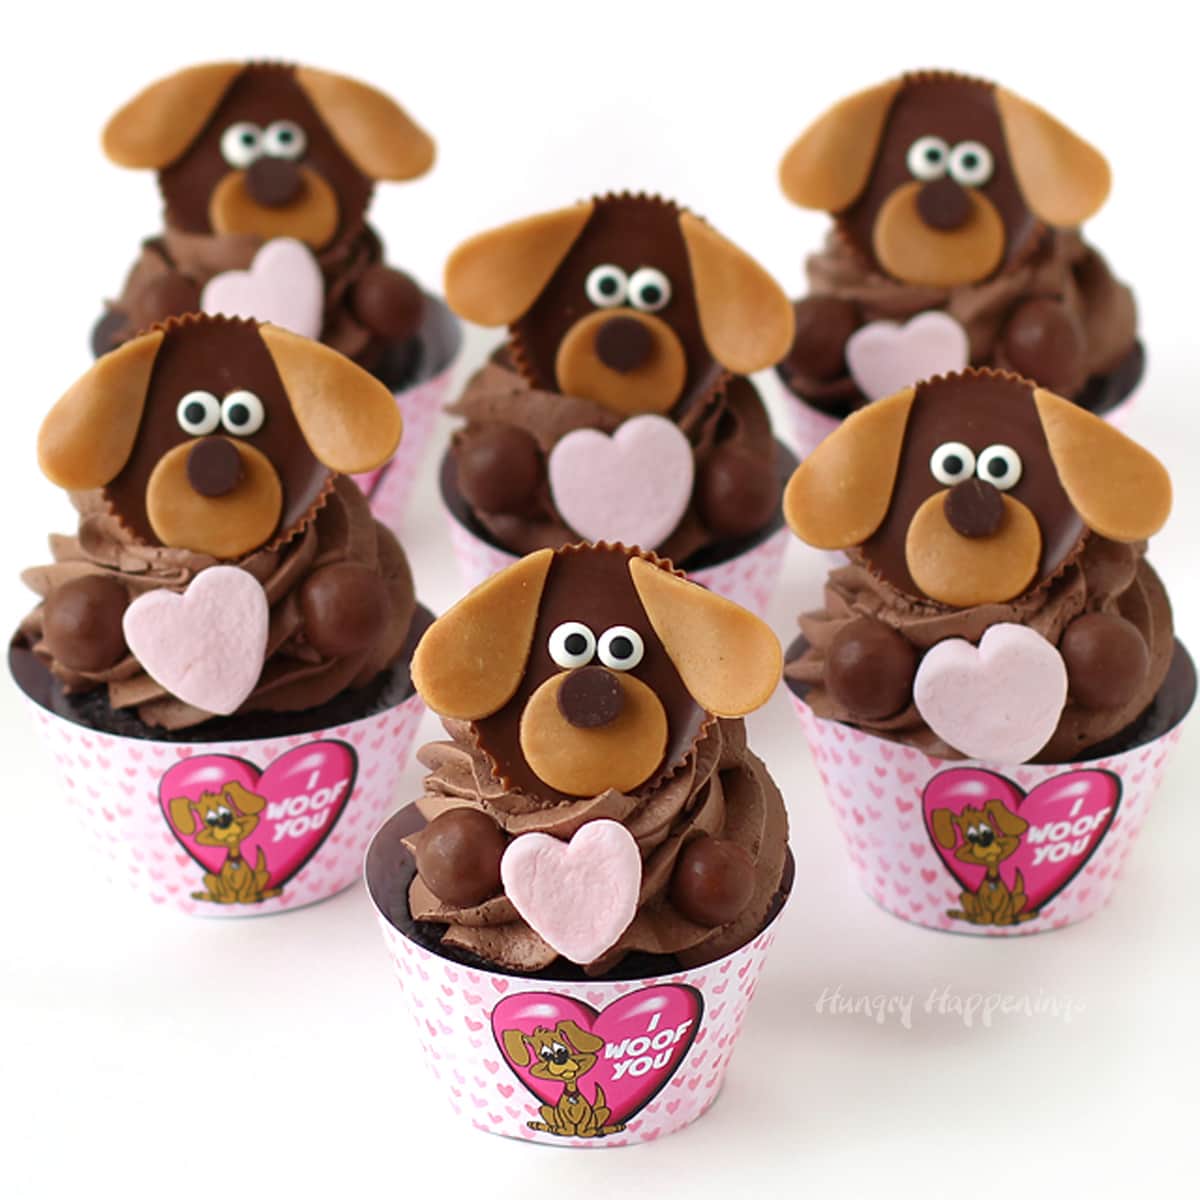 Cute chocolate dog cupcakes topped with Reese's Cups and candy hearts are wrapped in "I Woof You" cupcake wrappers for Valentine's Day